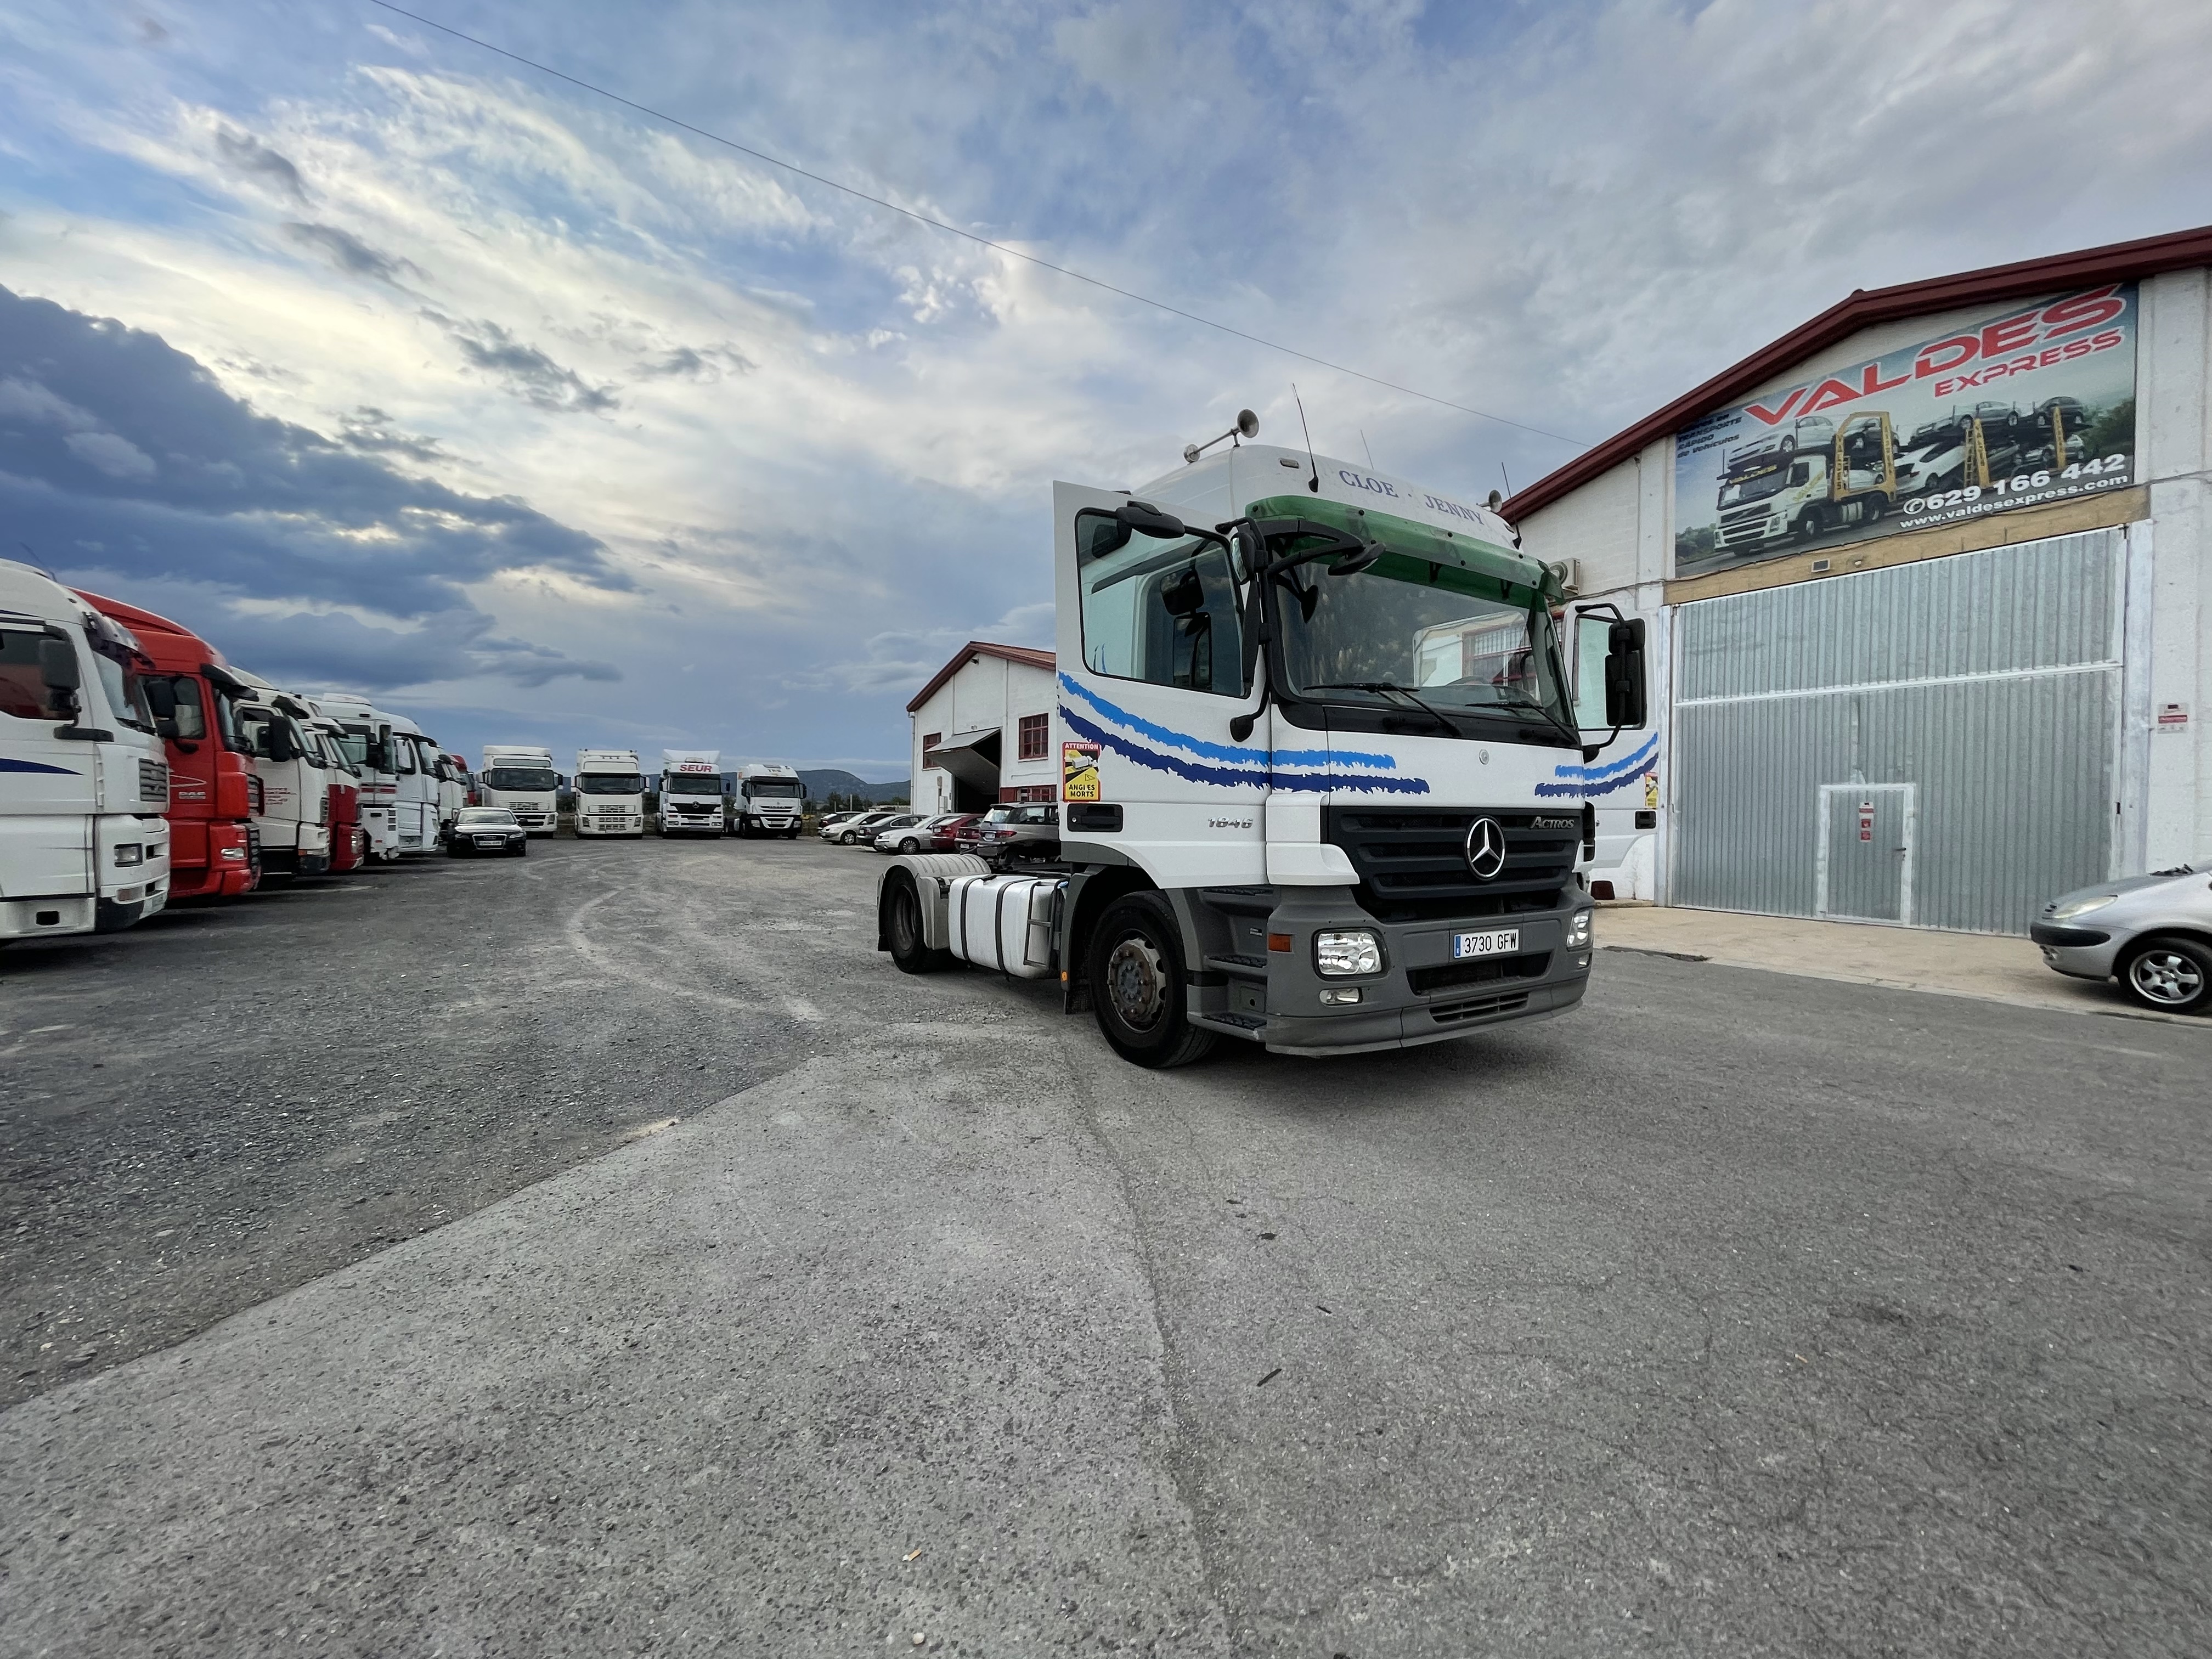 What are the advantages and disadvantages of importing a foreign truck?